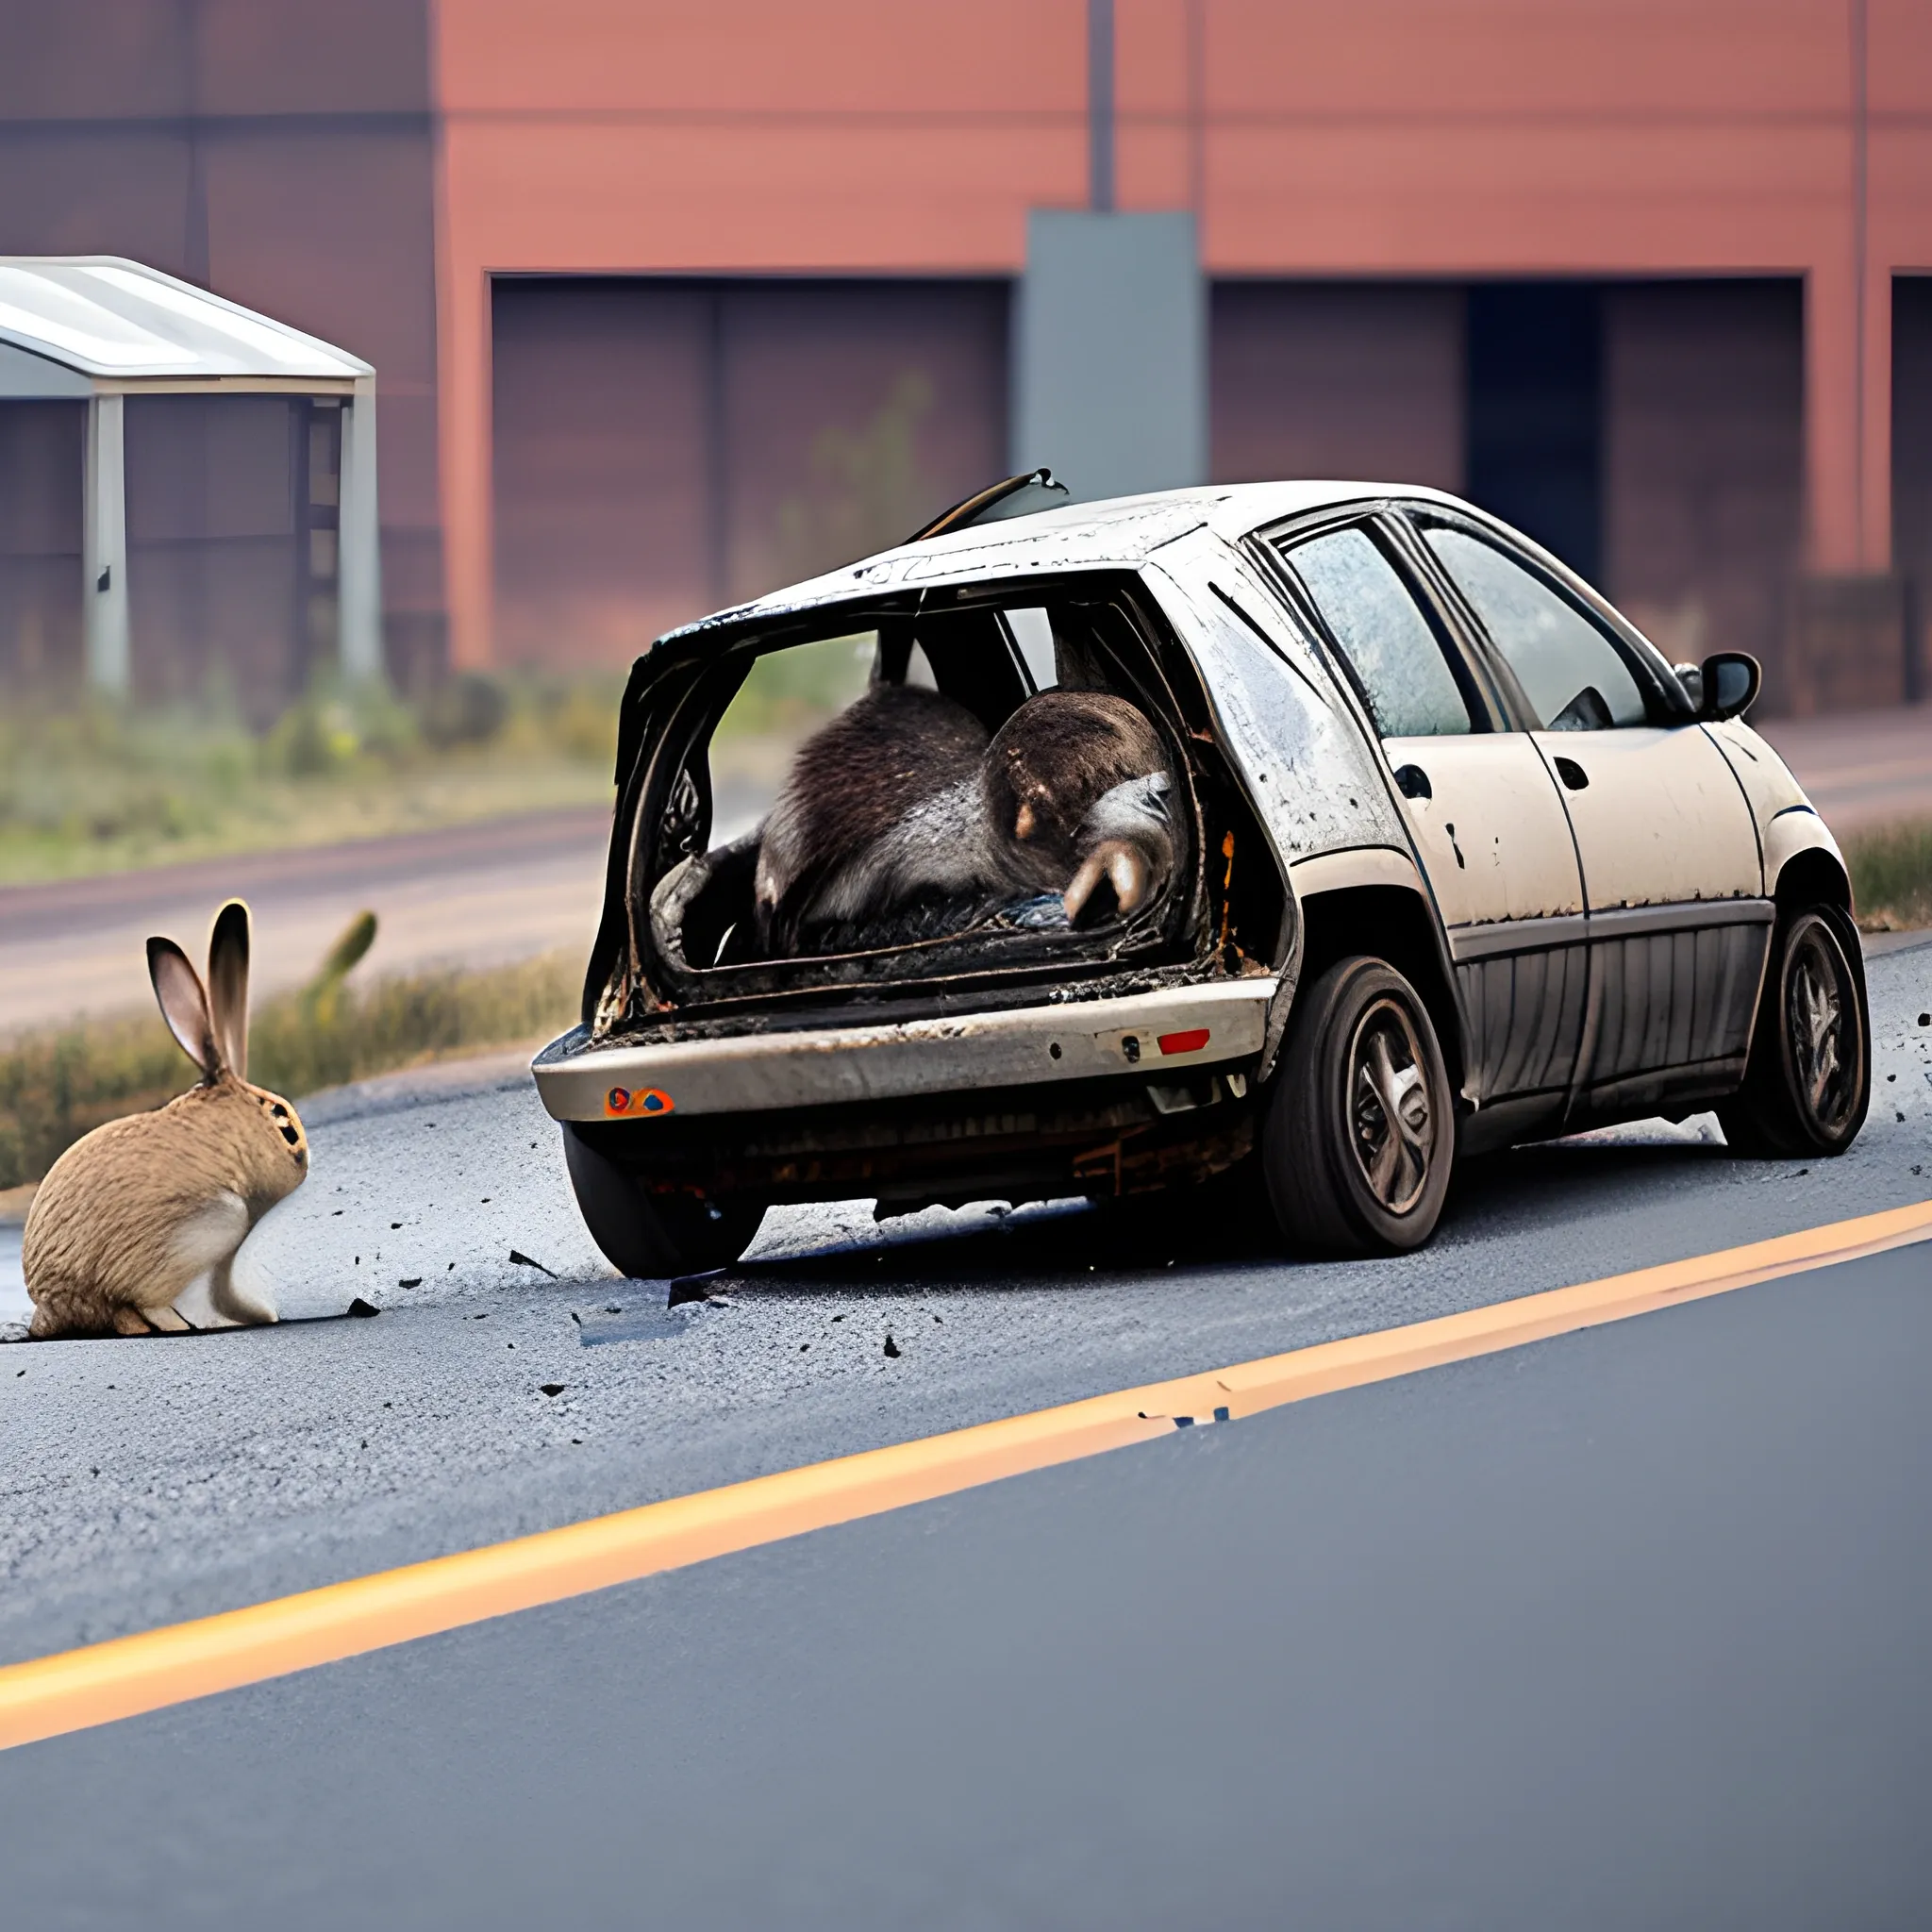 one moving car crushes a rabbit on the road, factory background, photography